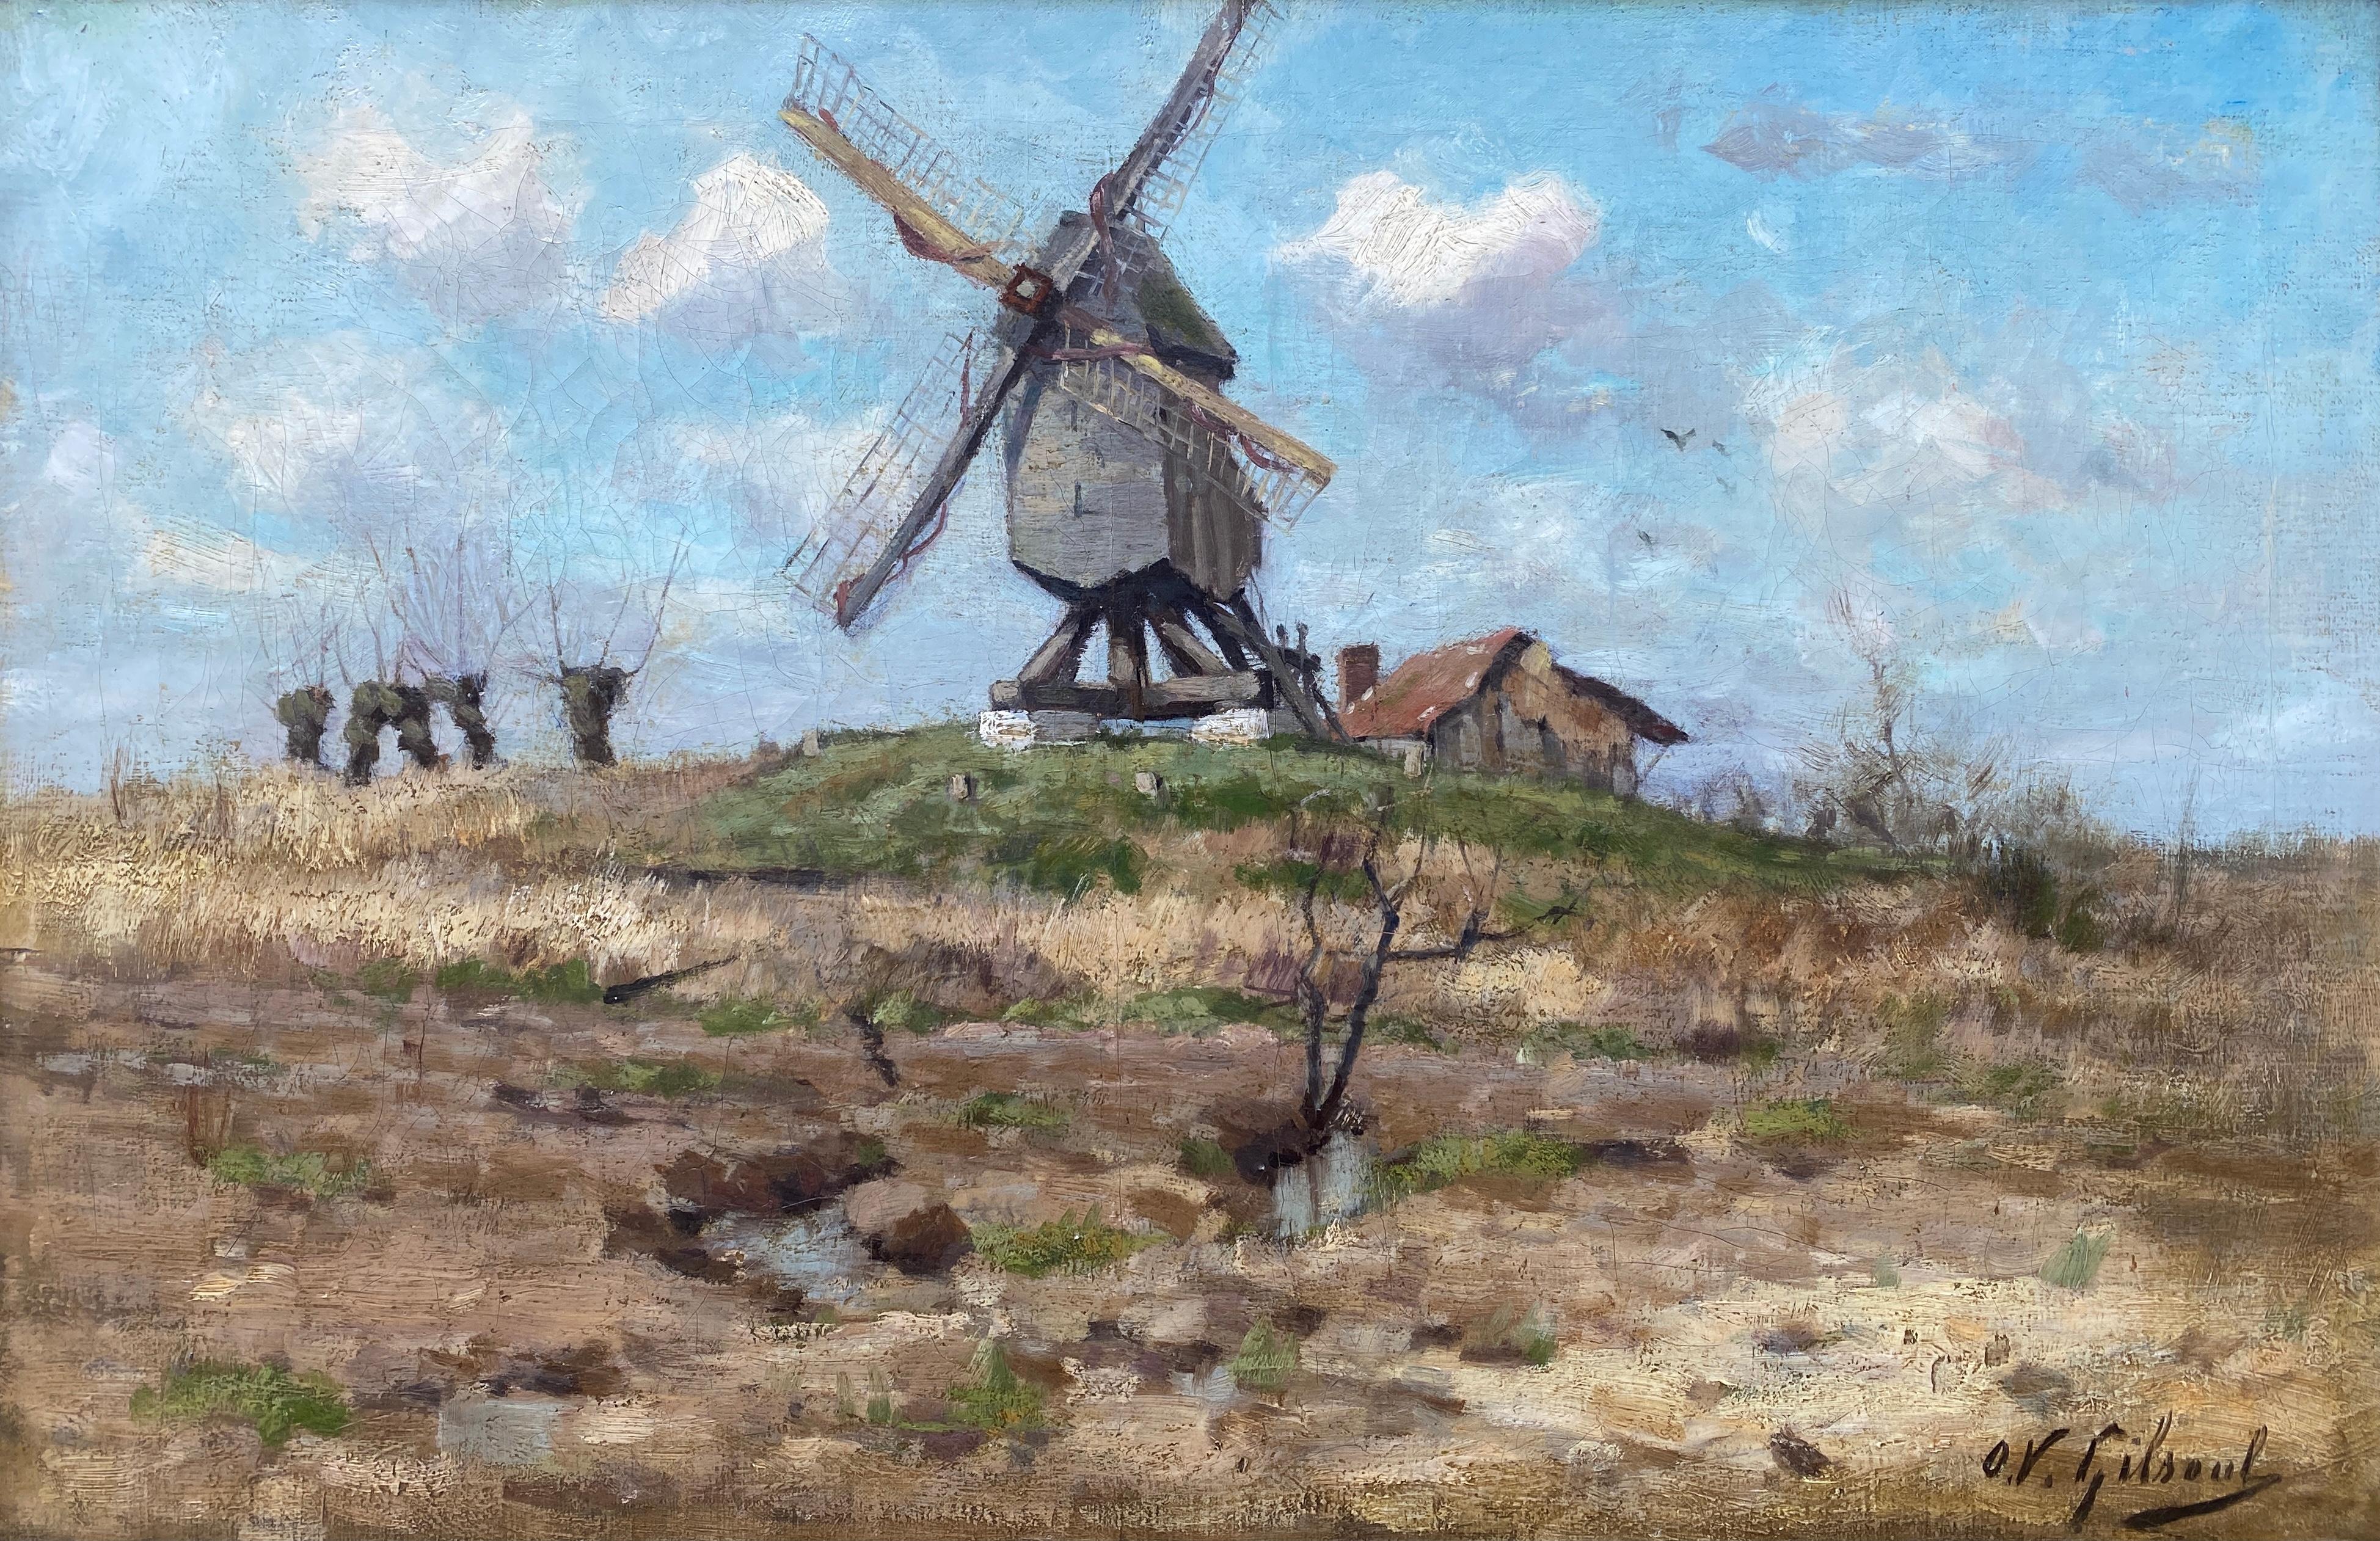 Victor Gilsoul
Brussels 1867 – 1943
Belgian Painter

A Landscape with a Mill
Signature: Signed bottom right
Medium: Oil on canvas
Dimensions: Image size 36 x 58 cm, frame size 42 x 60 cm

Biography: Gilsoul Victor was born on 10 September 10, 1867